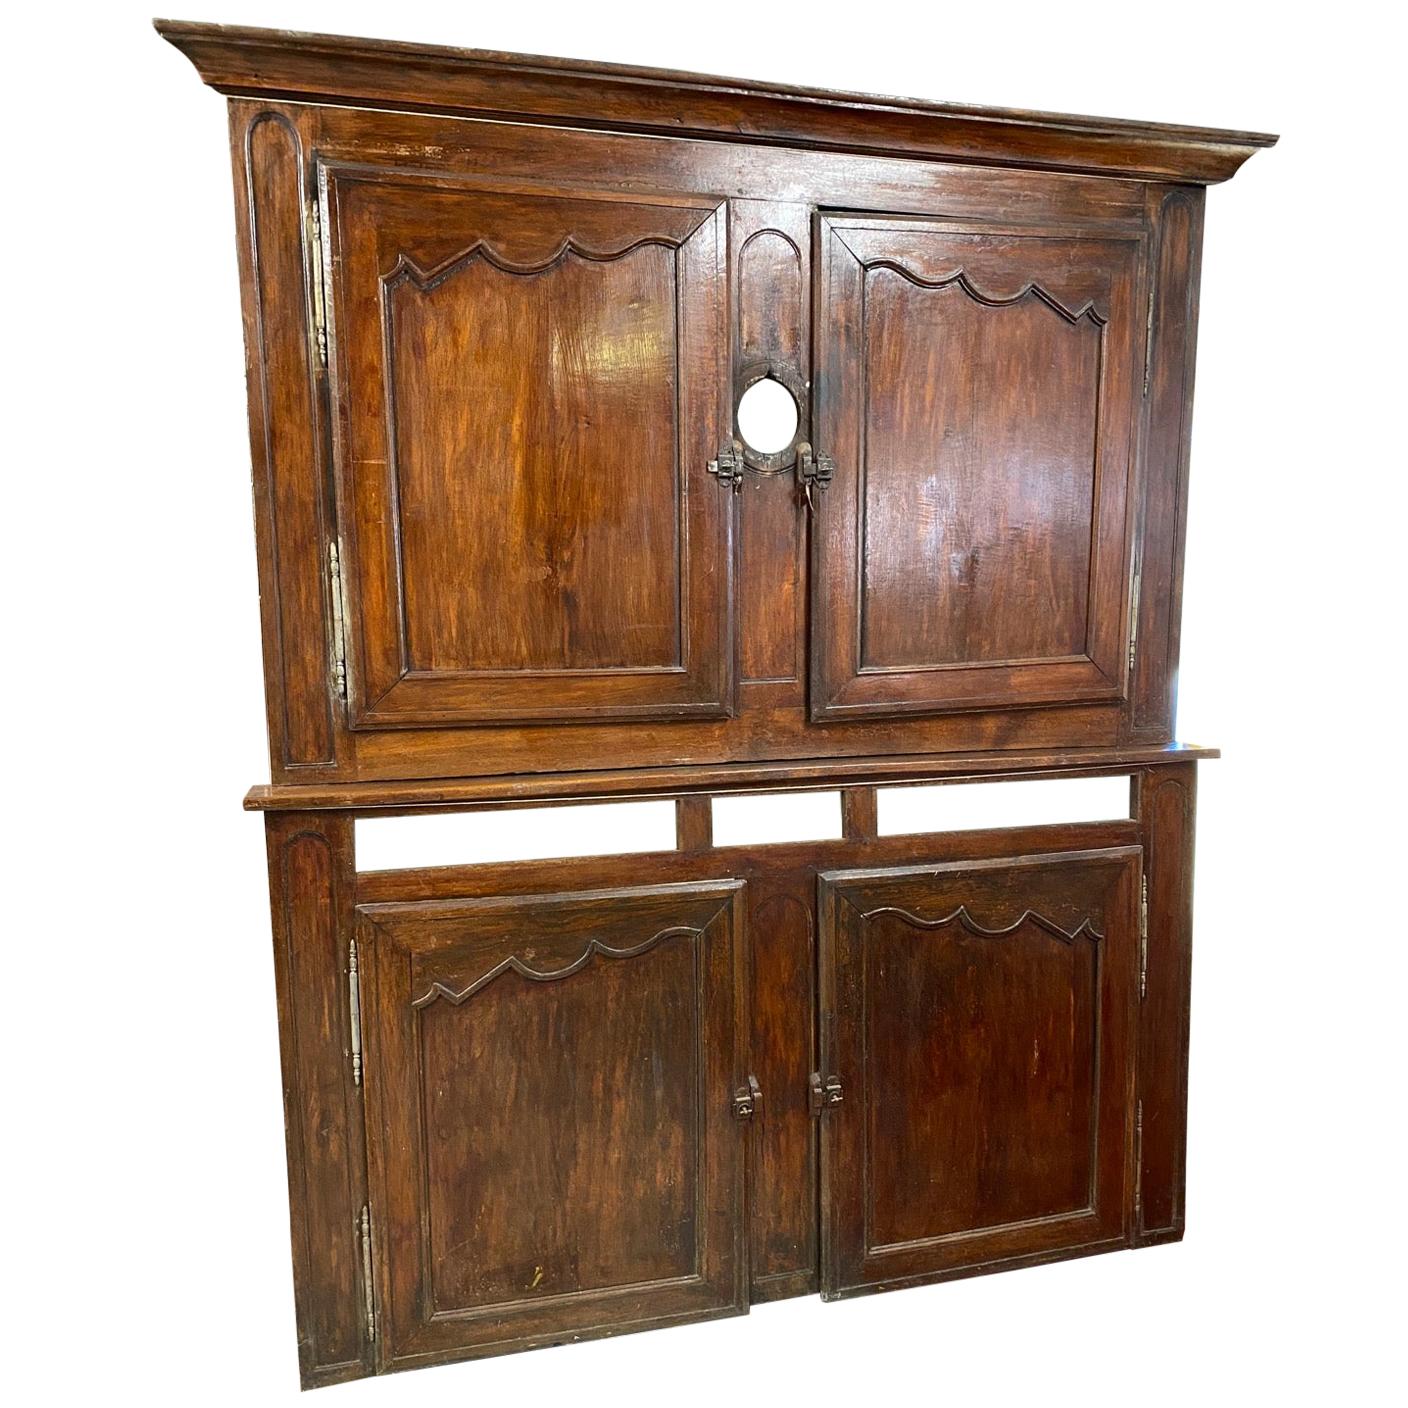 Late 18th Century French Paneled Boiserie Storage Wall Unit